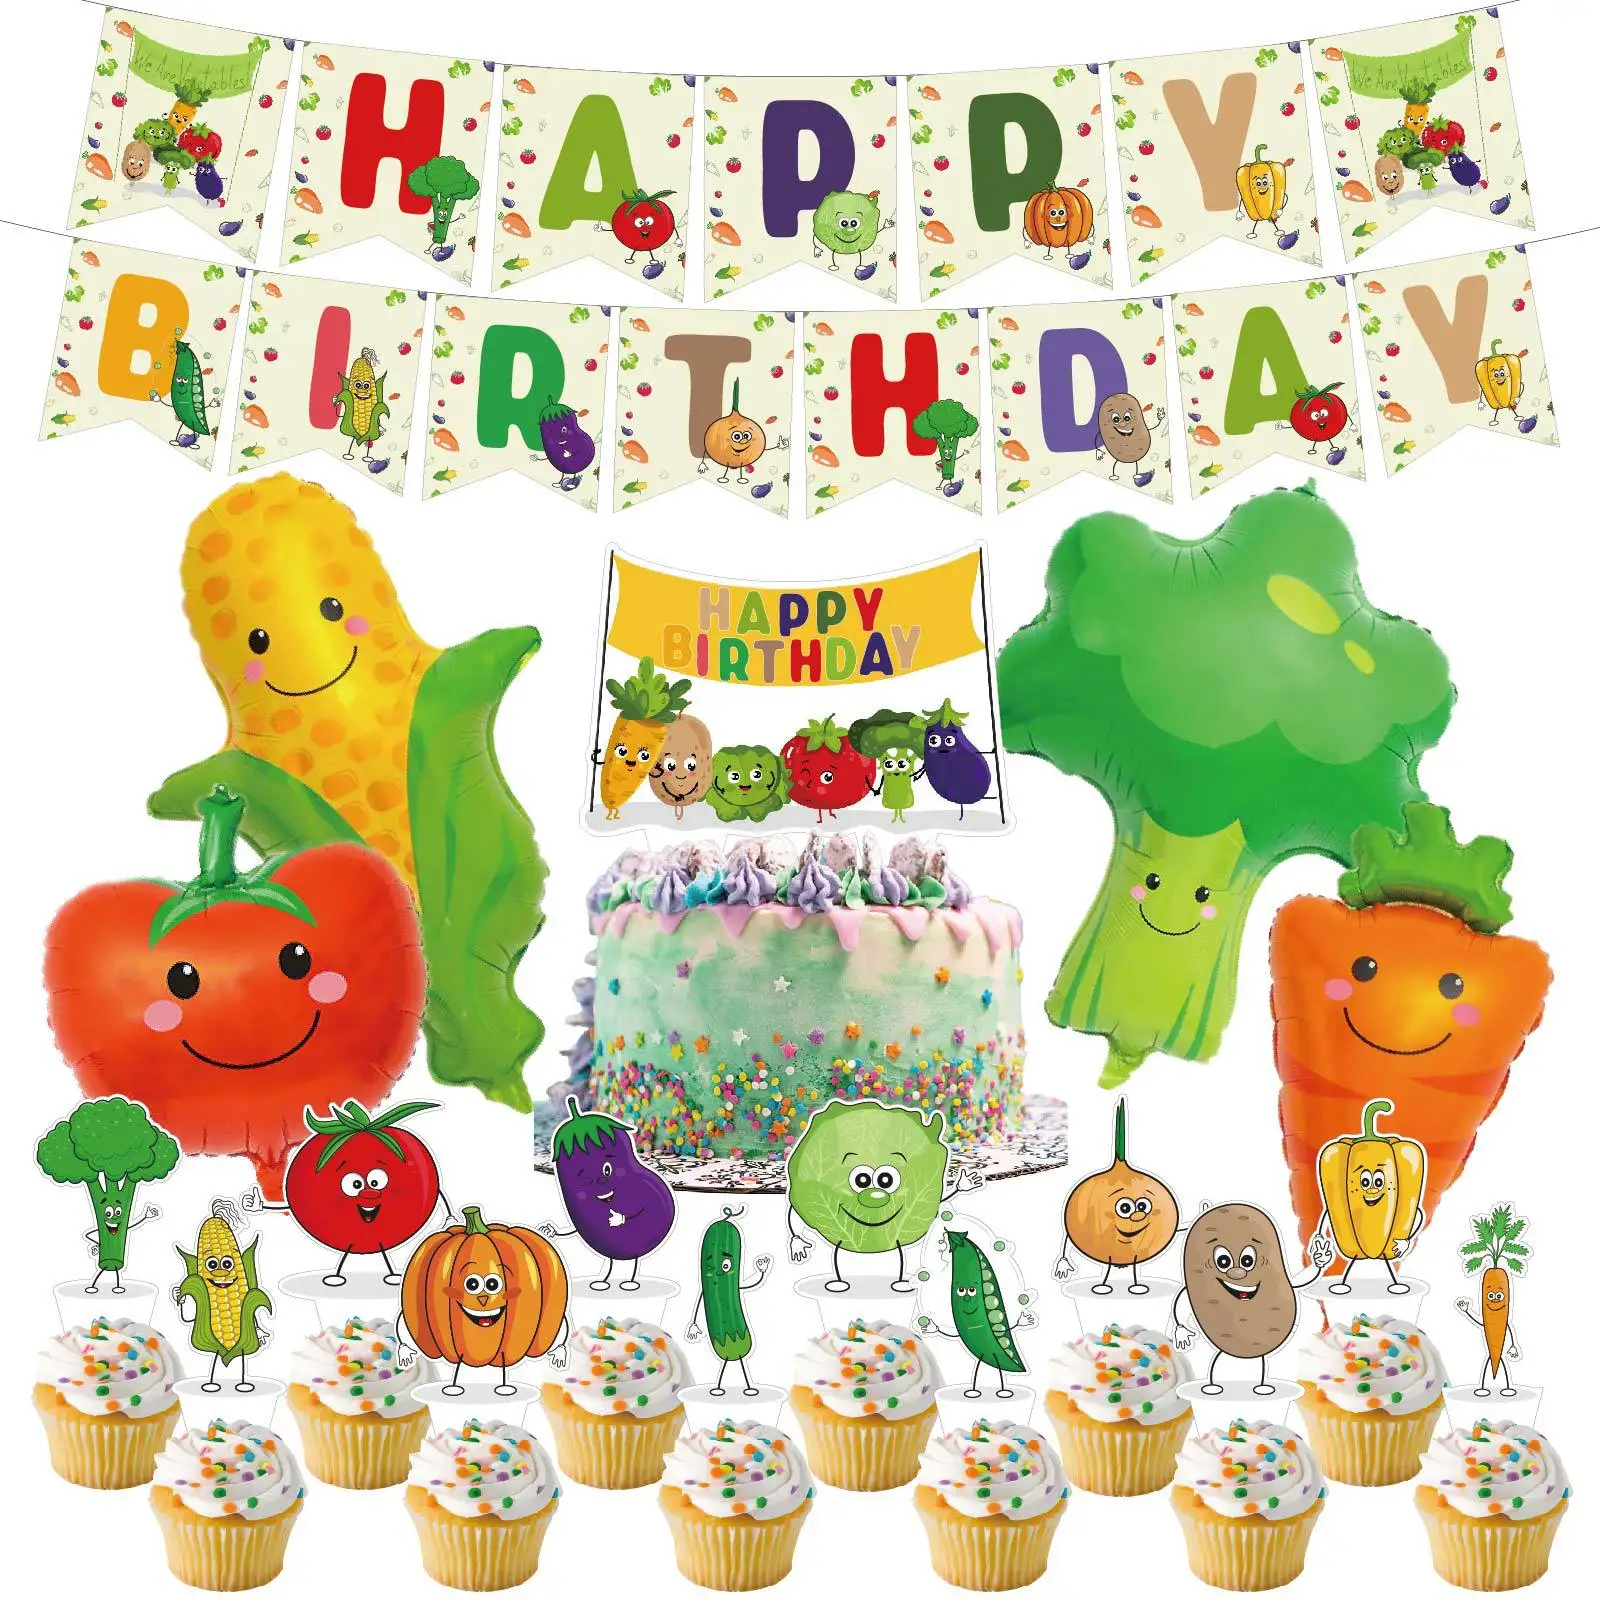 

Vegetable Themed Birthday Decoration Set Corn Carrot Tomato Balloons with Cartoon Vegetable Happy Birthday Banner Cake Toppers